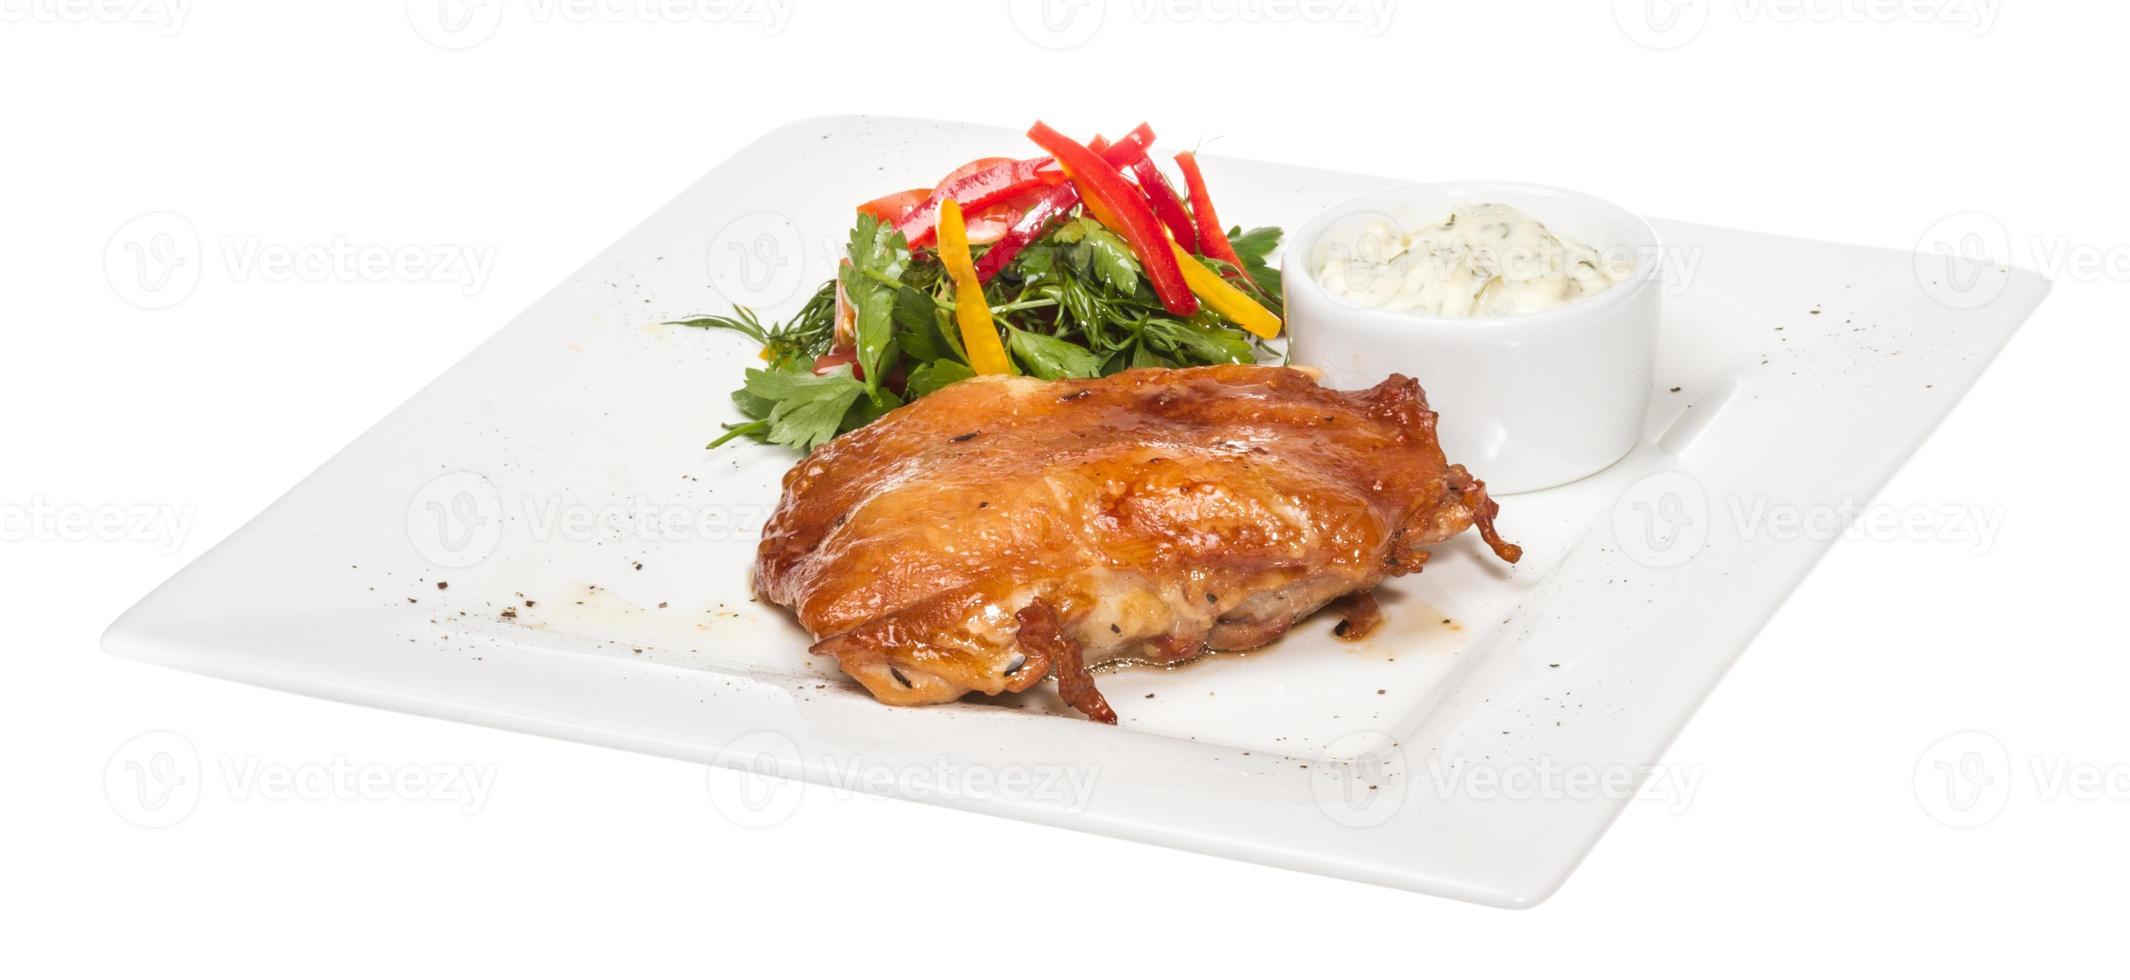 roasted chicken with vegetables on a white plate photo